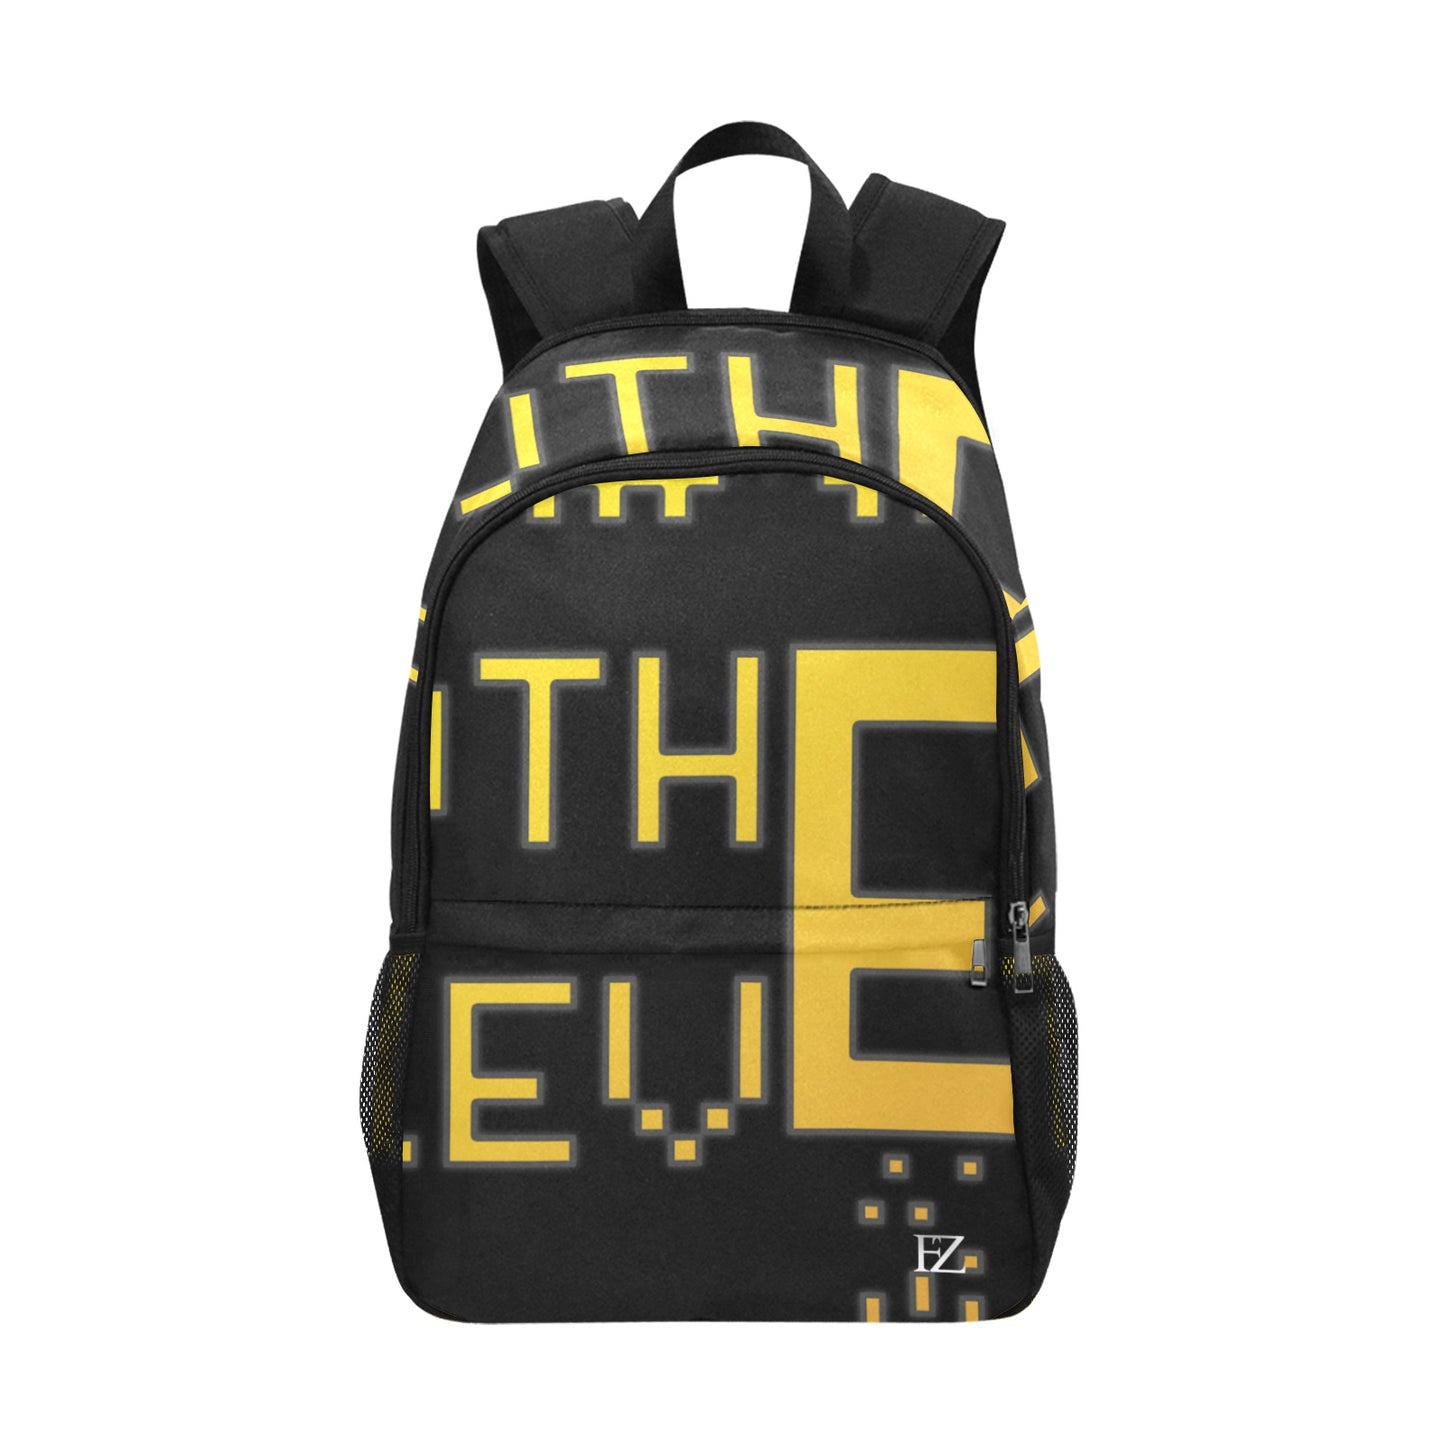 fz yellow levels backpack one size / fz levels backpack - black all-over print unisex casual backpack with side mesh pockets (model 1659)